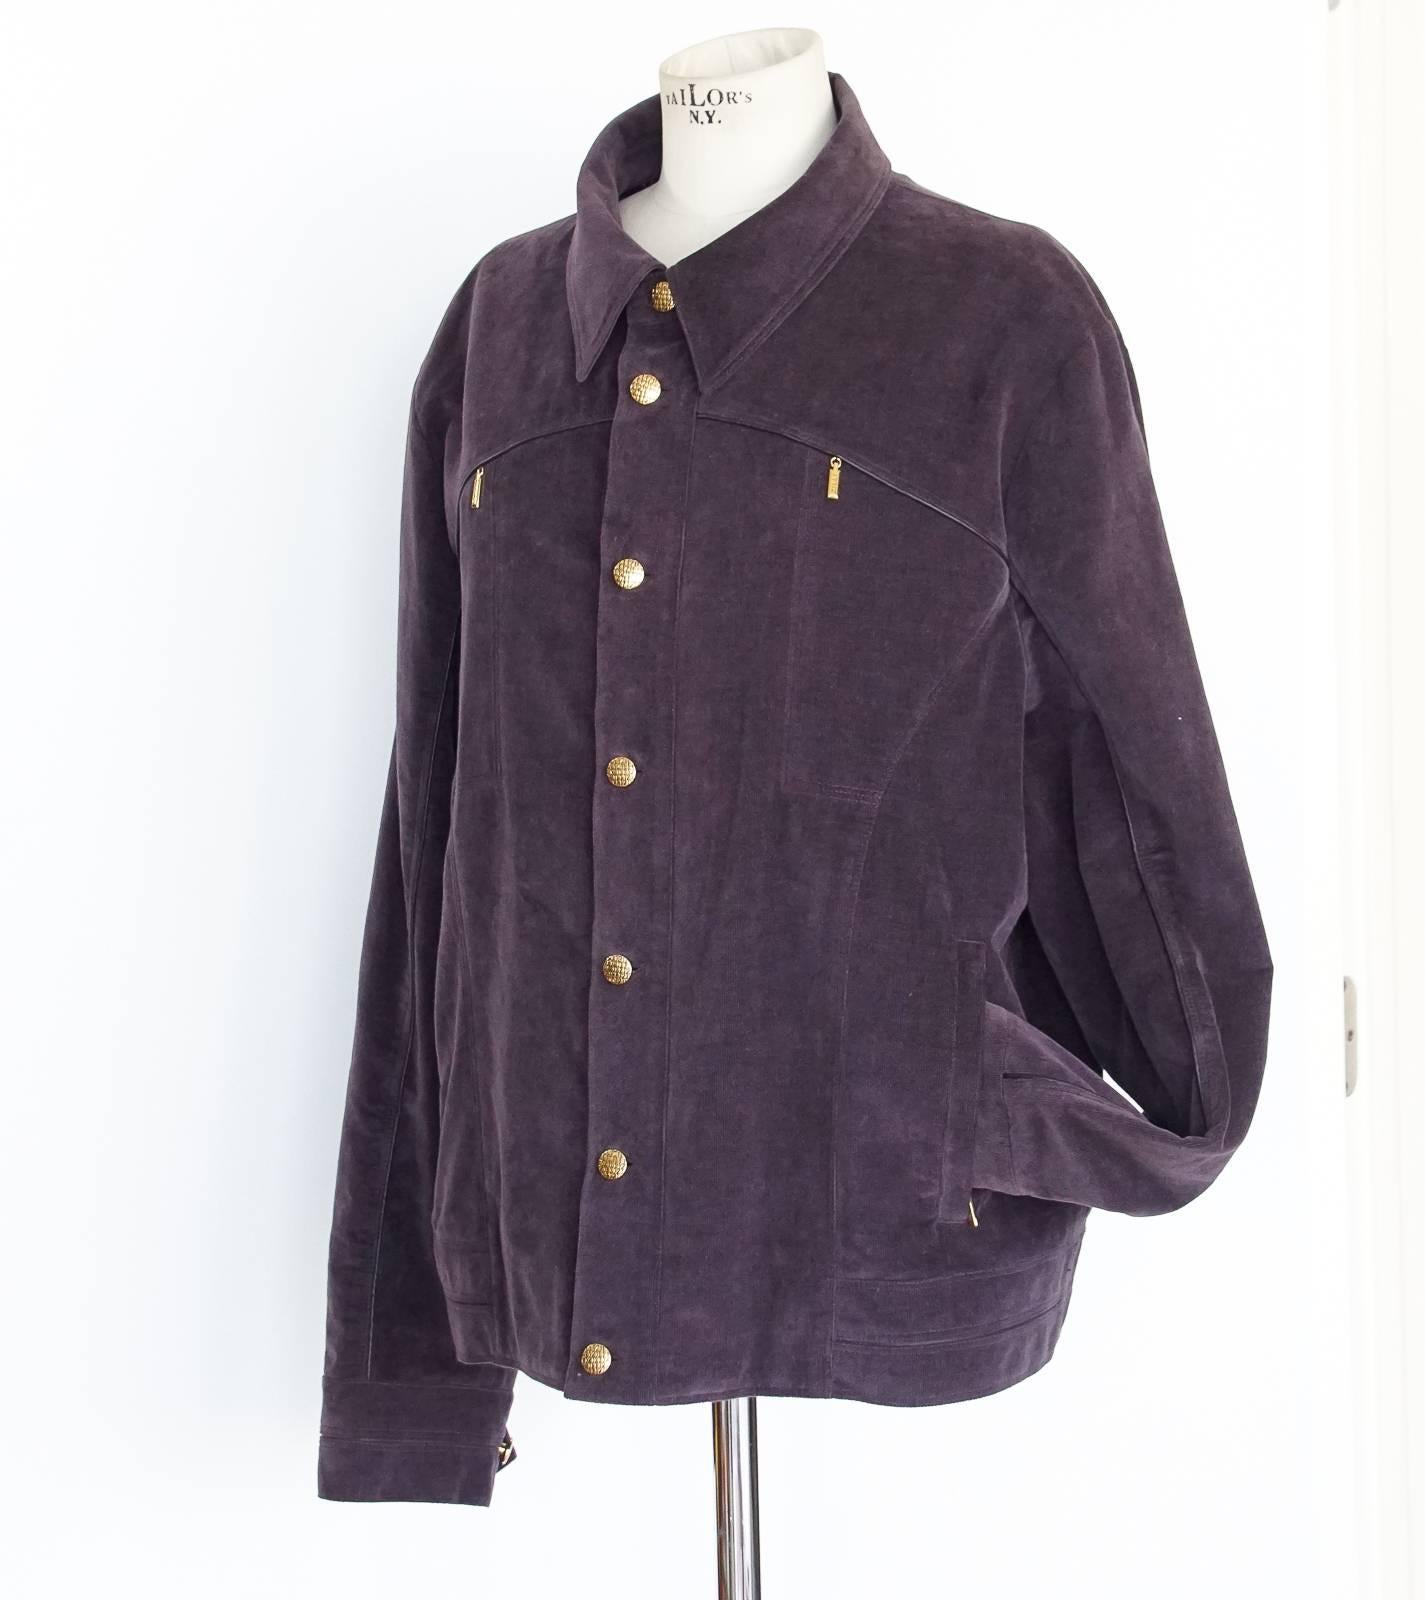 Guaranteed authentic Zilli amethyst corduroy jacket with leather piping.
7 gold front buttons and 2 buttons at each cuff - all embossed.
2 slash zip pockets with logo embossed pulls.
2 sewn in ornamental embossed pulls.
2 internal pockets with